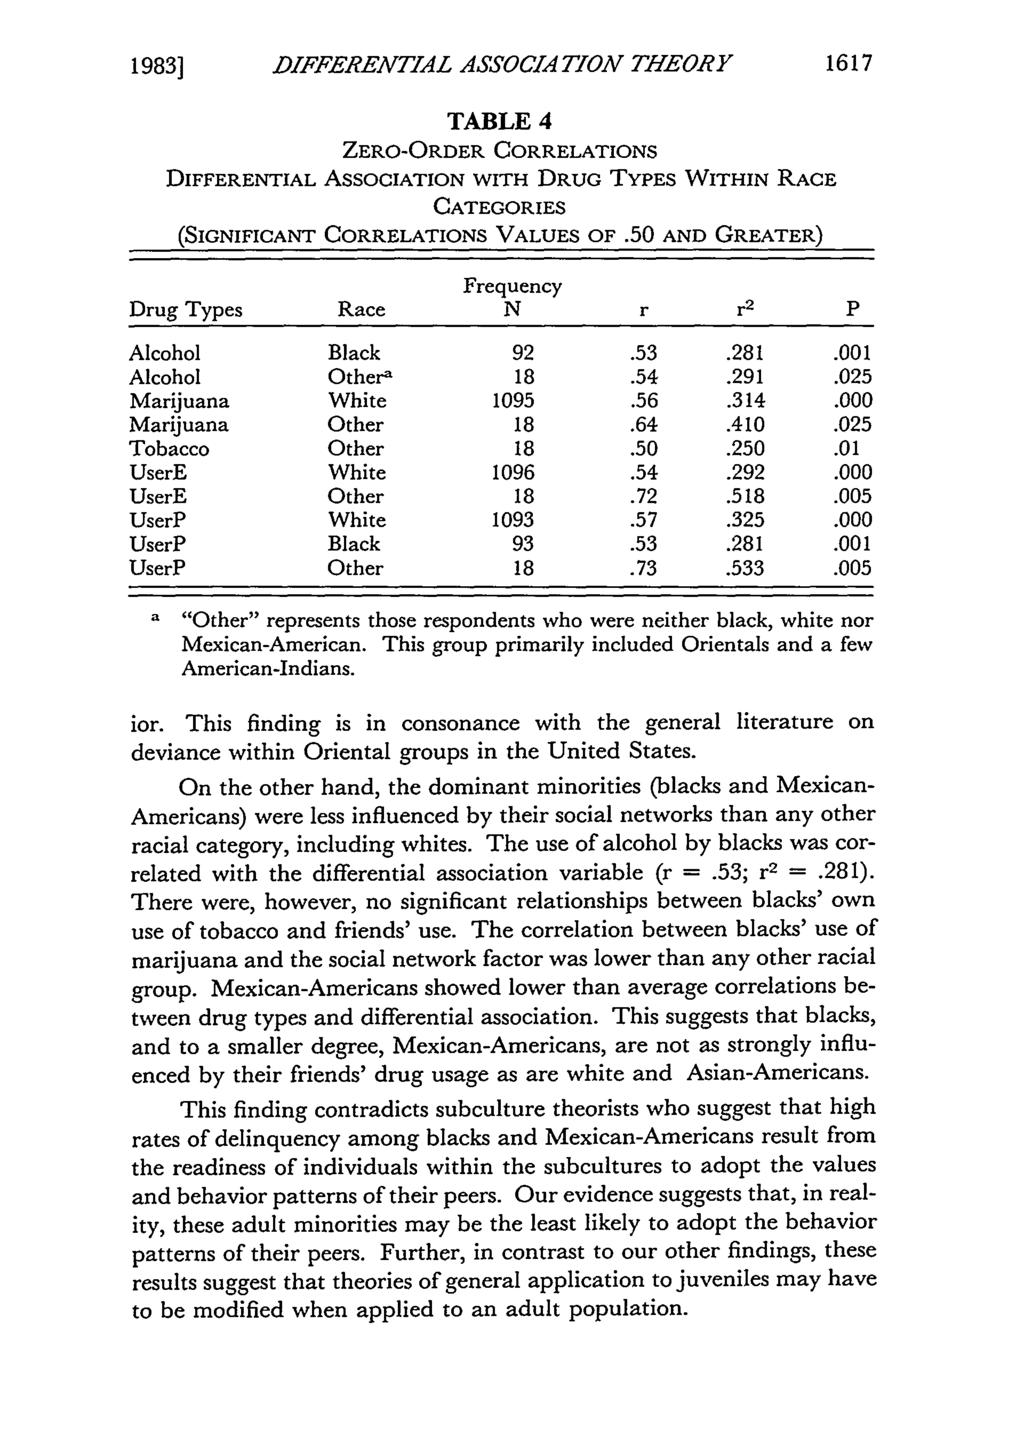 19831 DIFFERENTIAL ASSOCIATION THEORY 1617 TABLE 4 ZERO-ORDER CORRELATIONS DIFFERENTIAL ASSOCIATION WITH DRUG TYPES WITHIN RACE CATEGORIES (SIGNIFICANT CORRELATIONS VALUES OF.